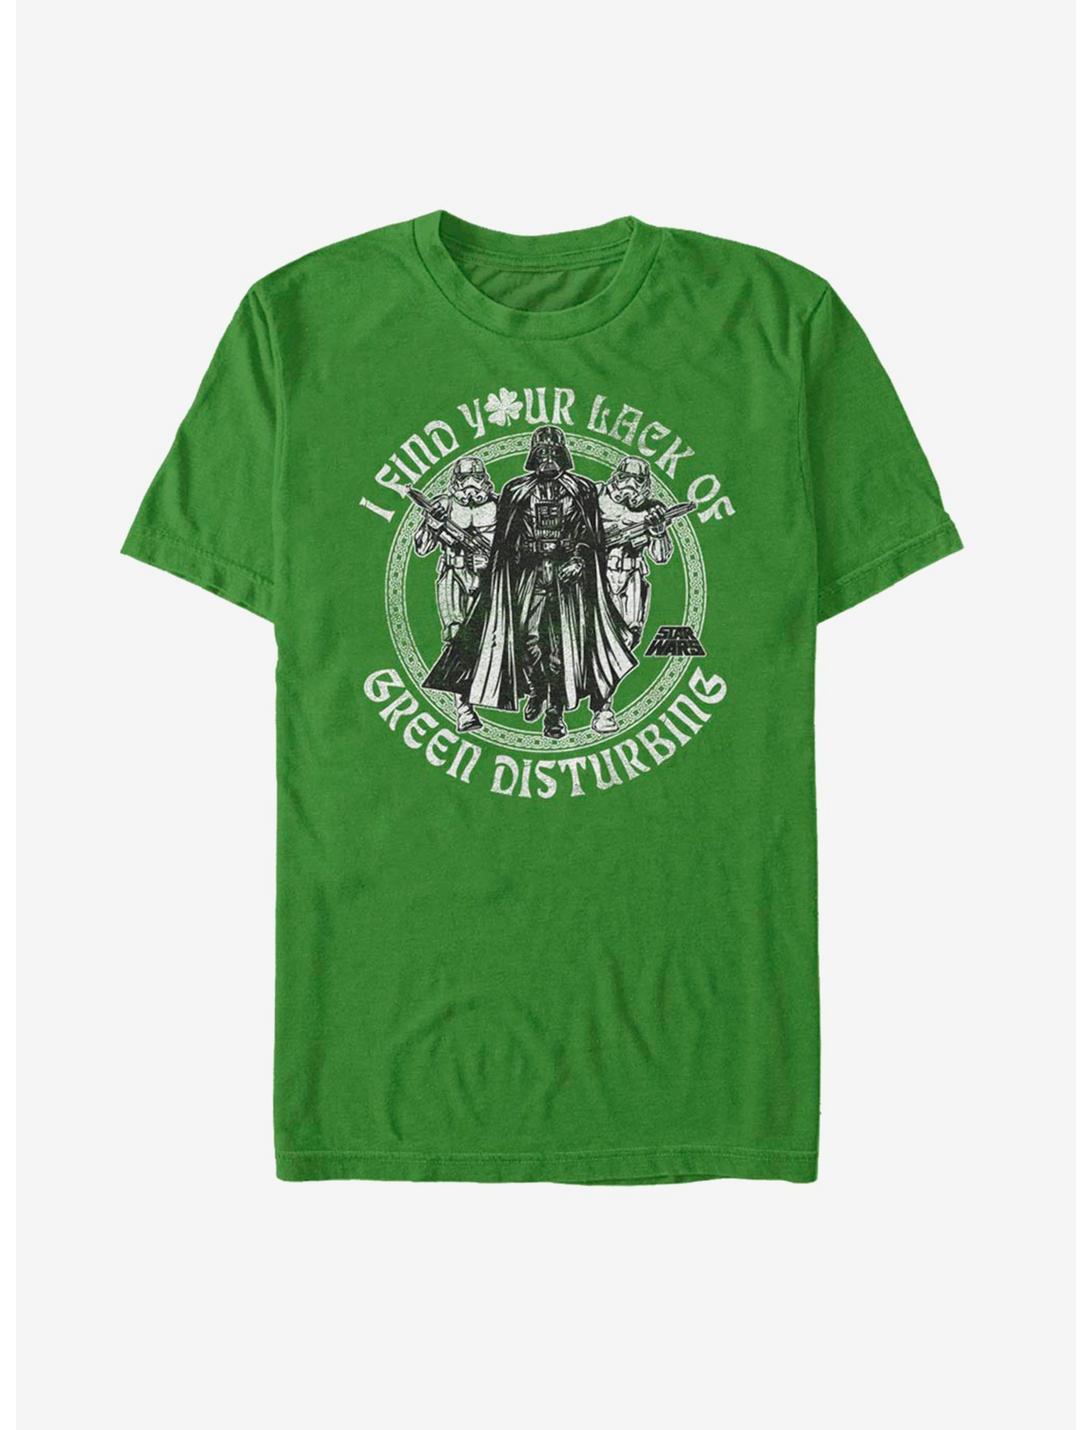 Star Wars Out Of Luck T-Shirt, KELLY, hi-res